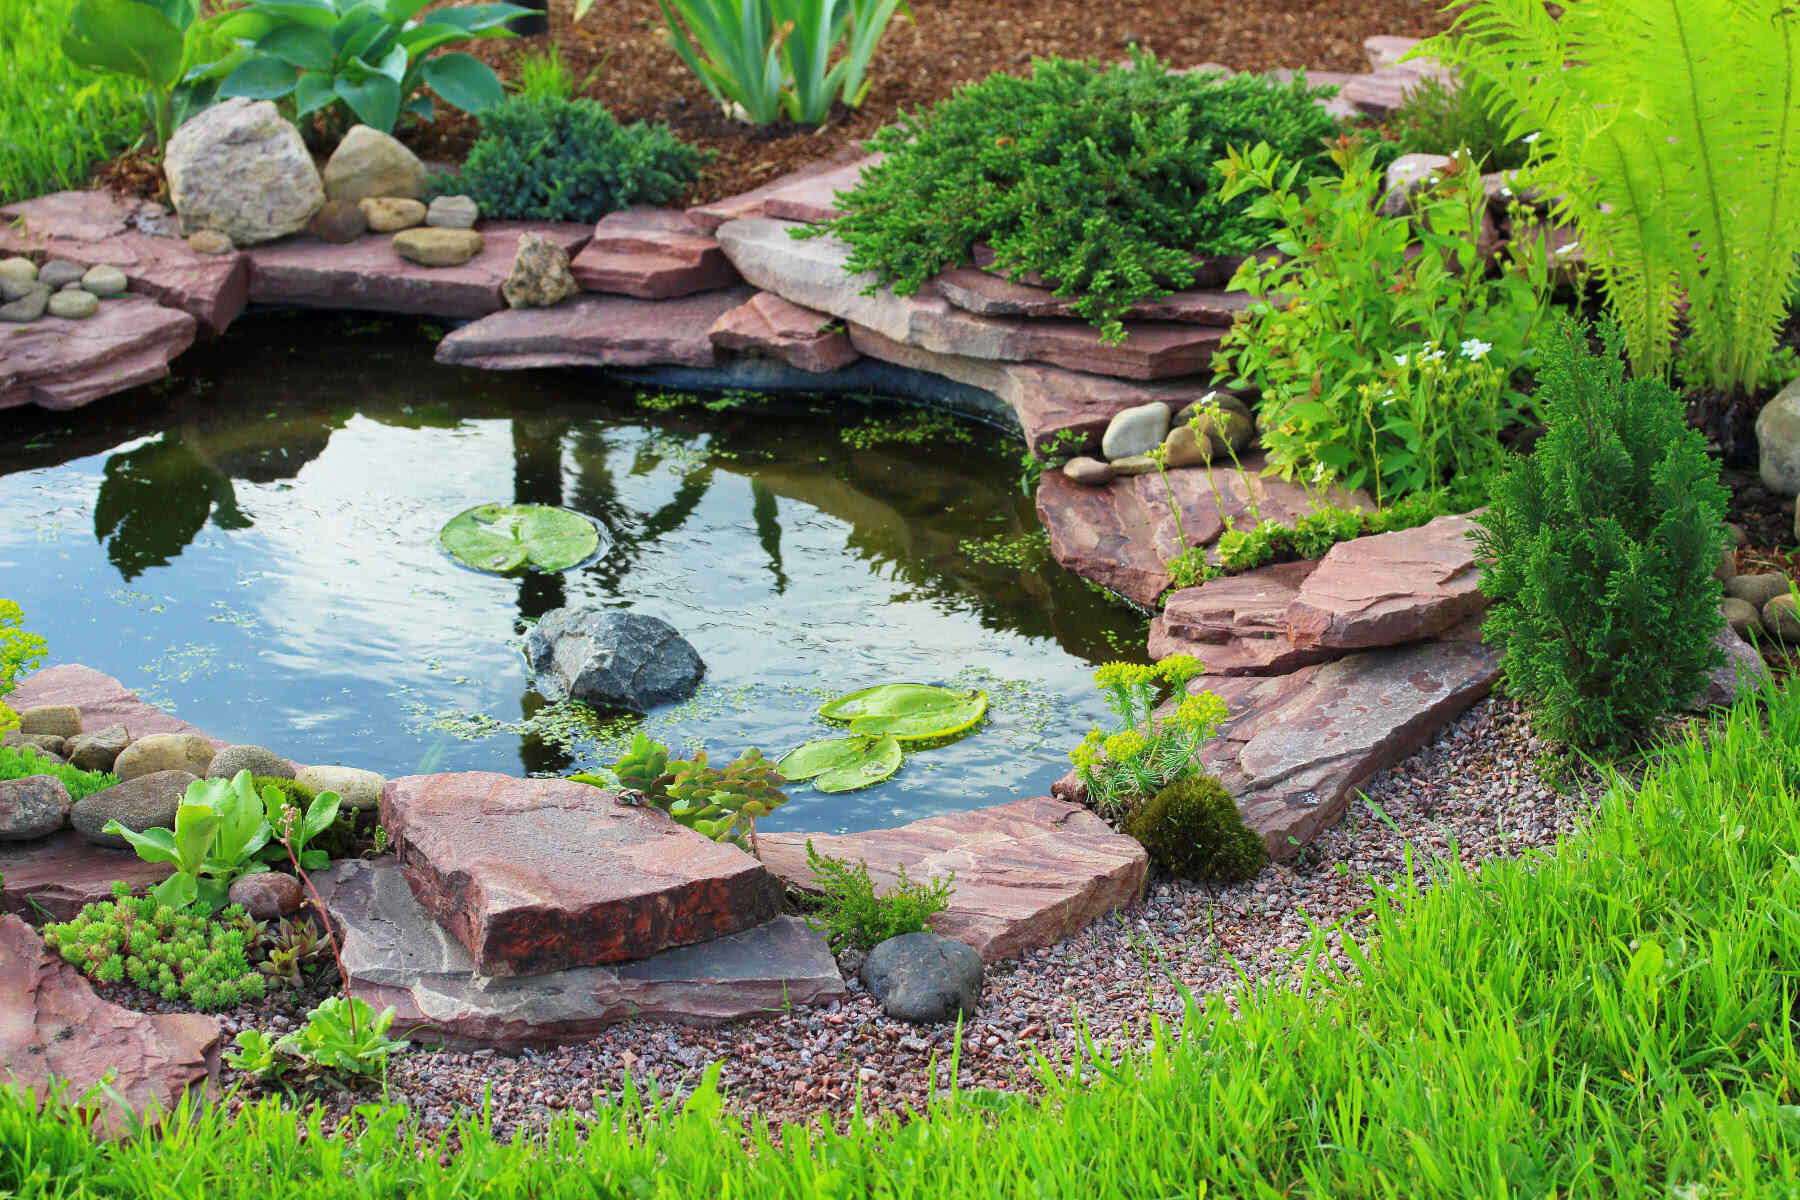 How To Make An Outdoor Fish Pond